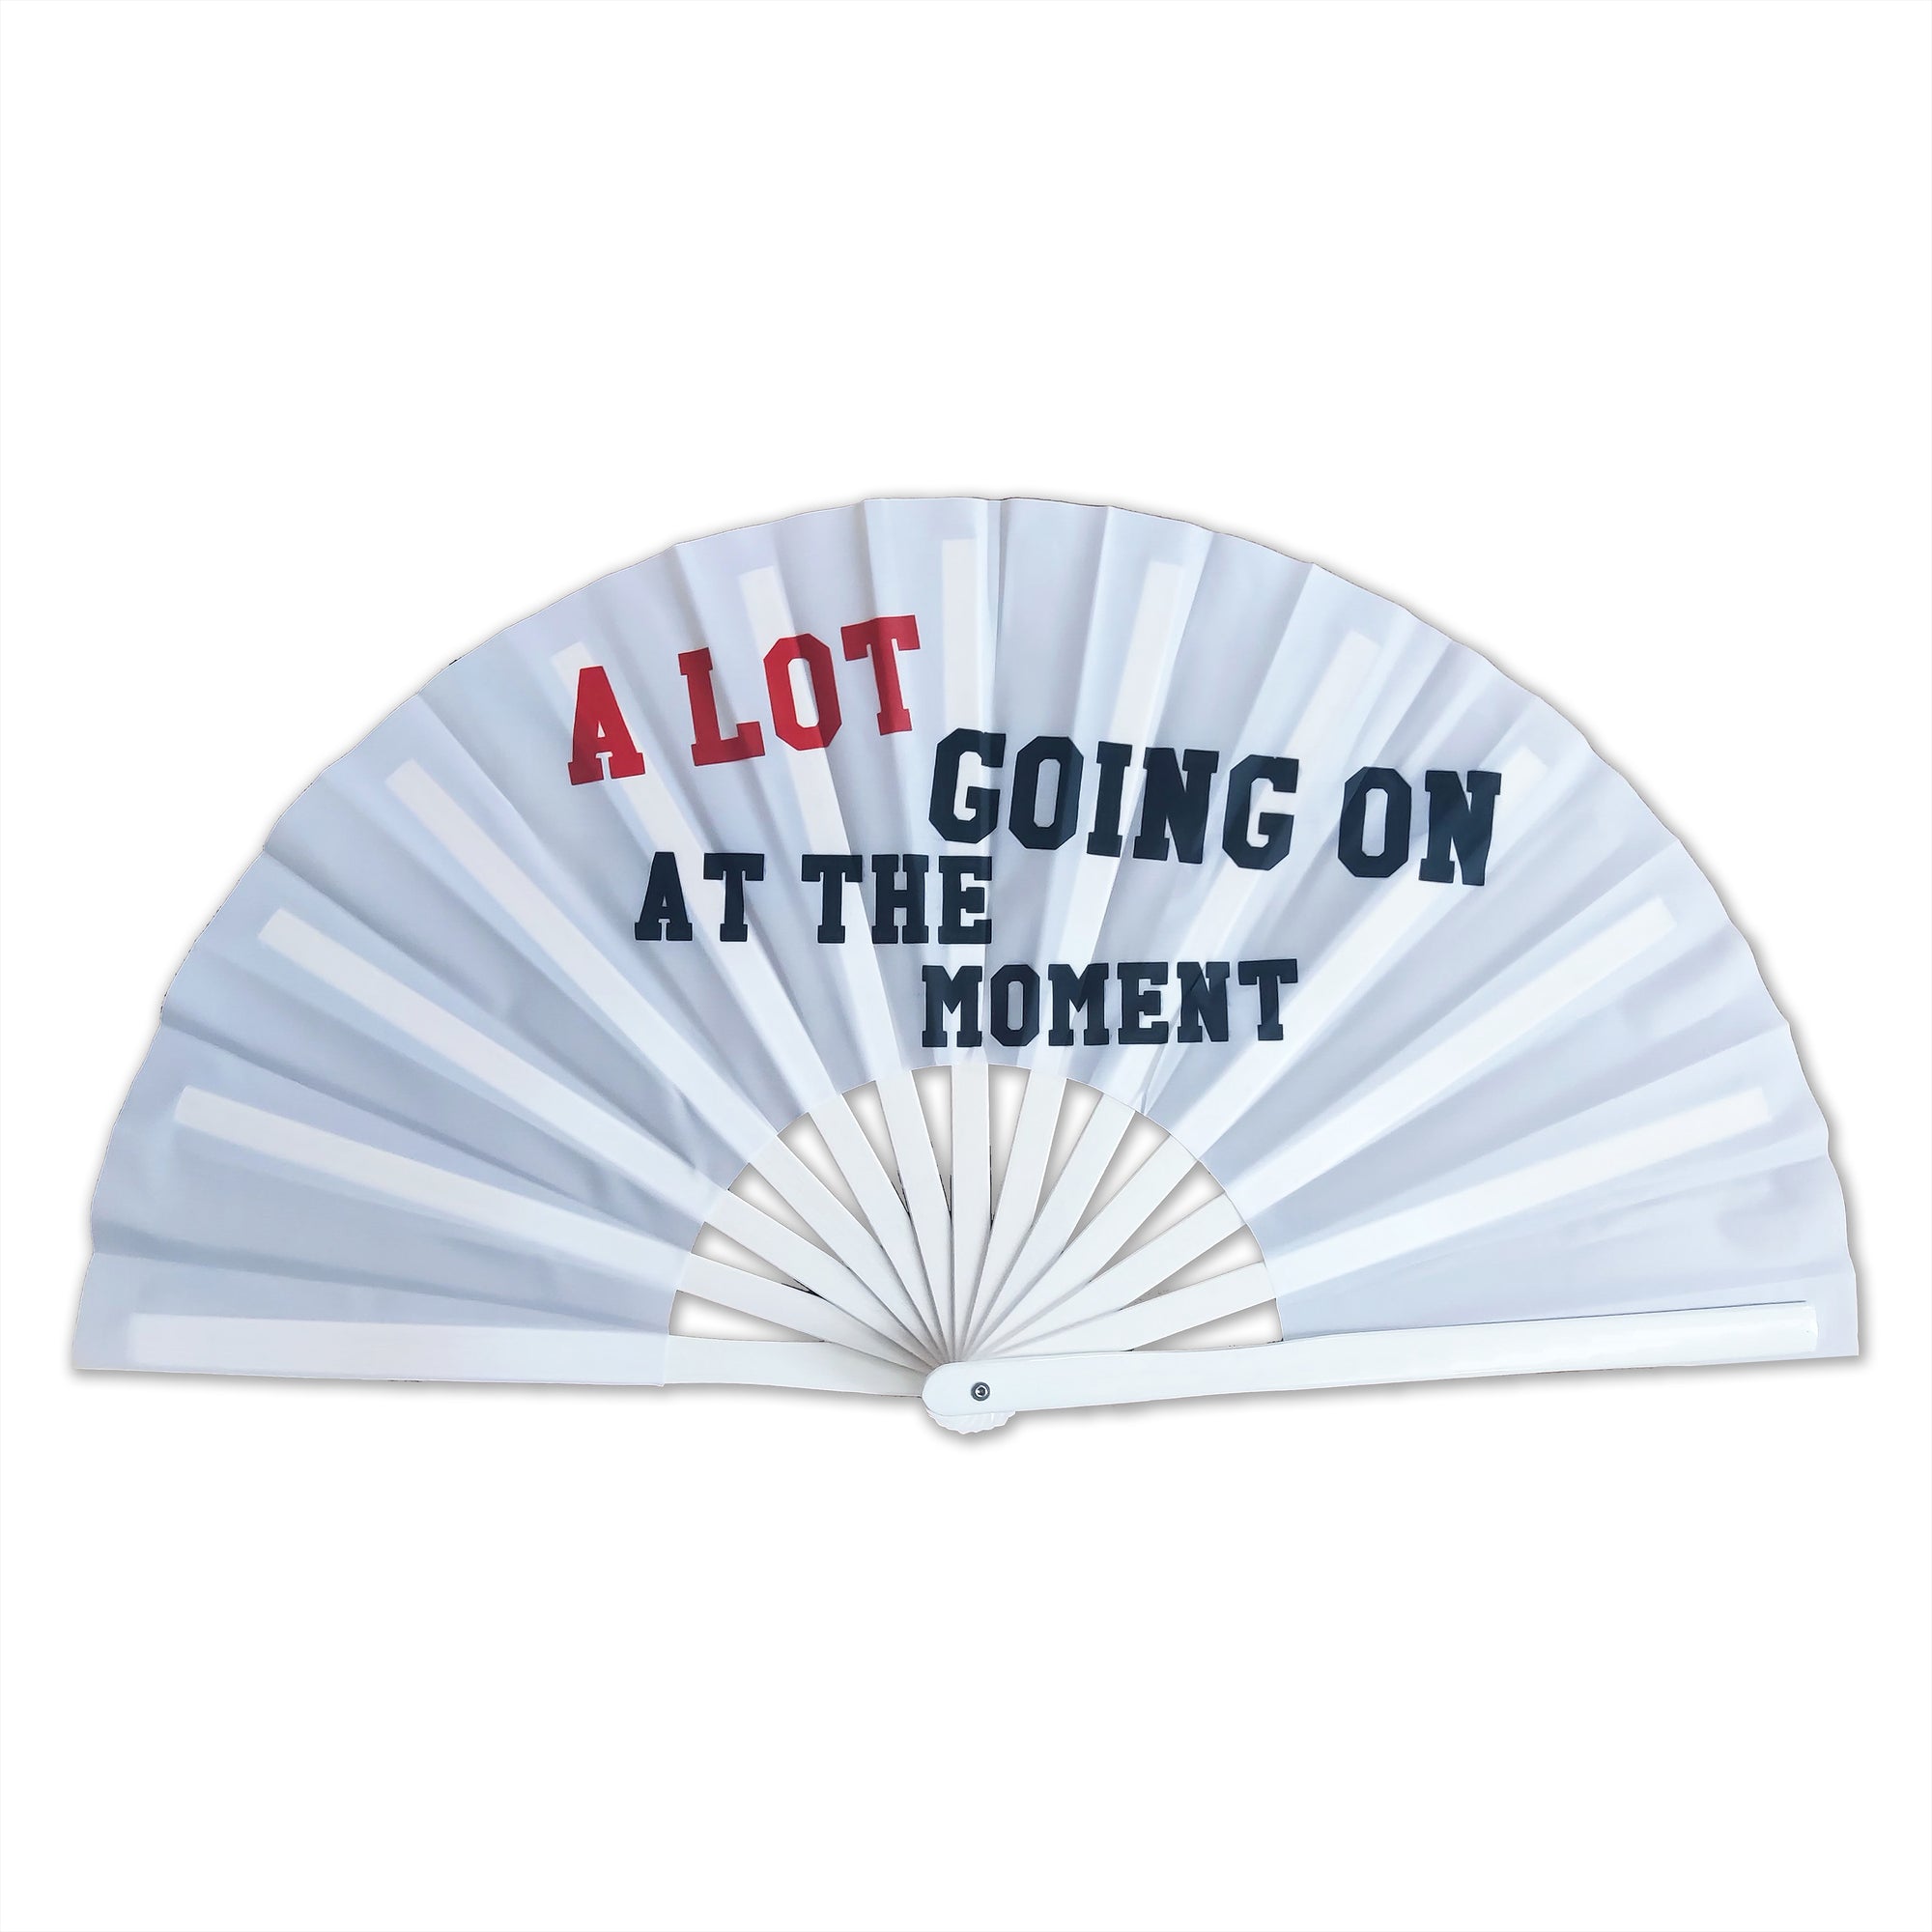 A LOT GOING ON AT THE MOMENT Large Concert Hand Fan - Foldable Handheld Eras Fan, Perfect for Festivals, Raves , Abanicos de Mano para Fiesta